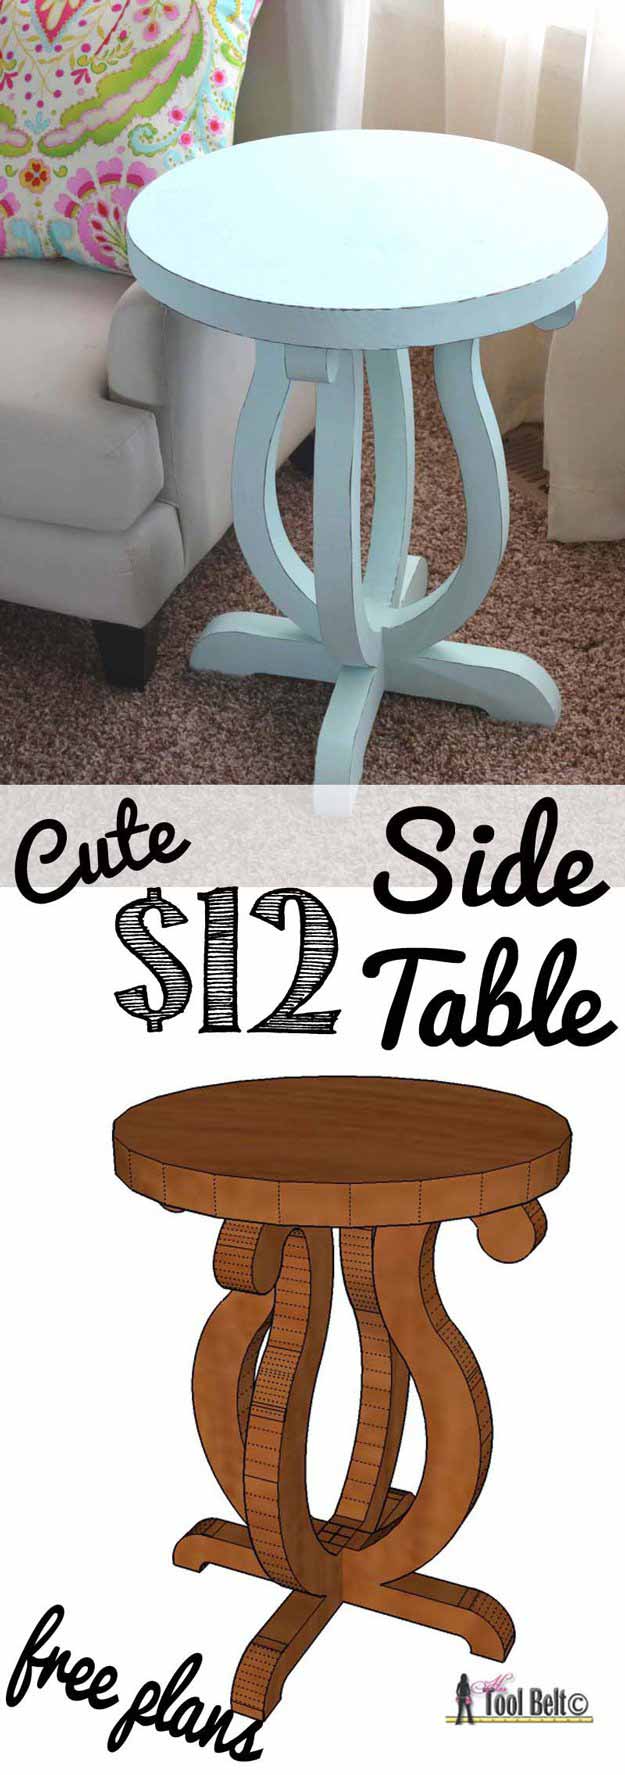 Cute Side Table | Easy Woodworking Projects 